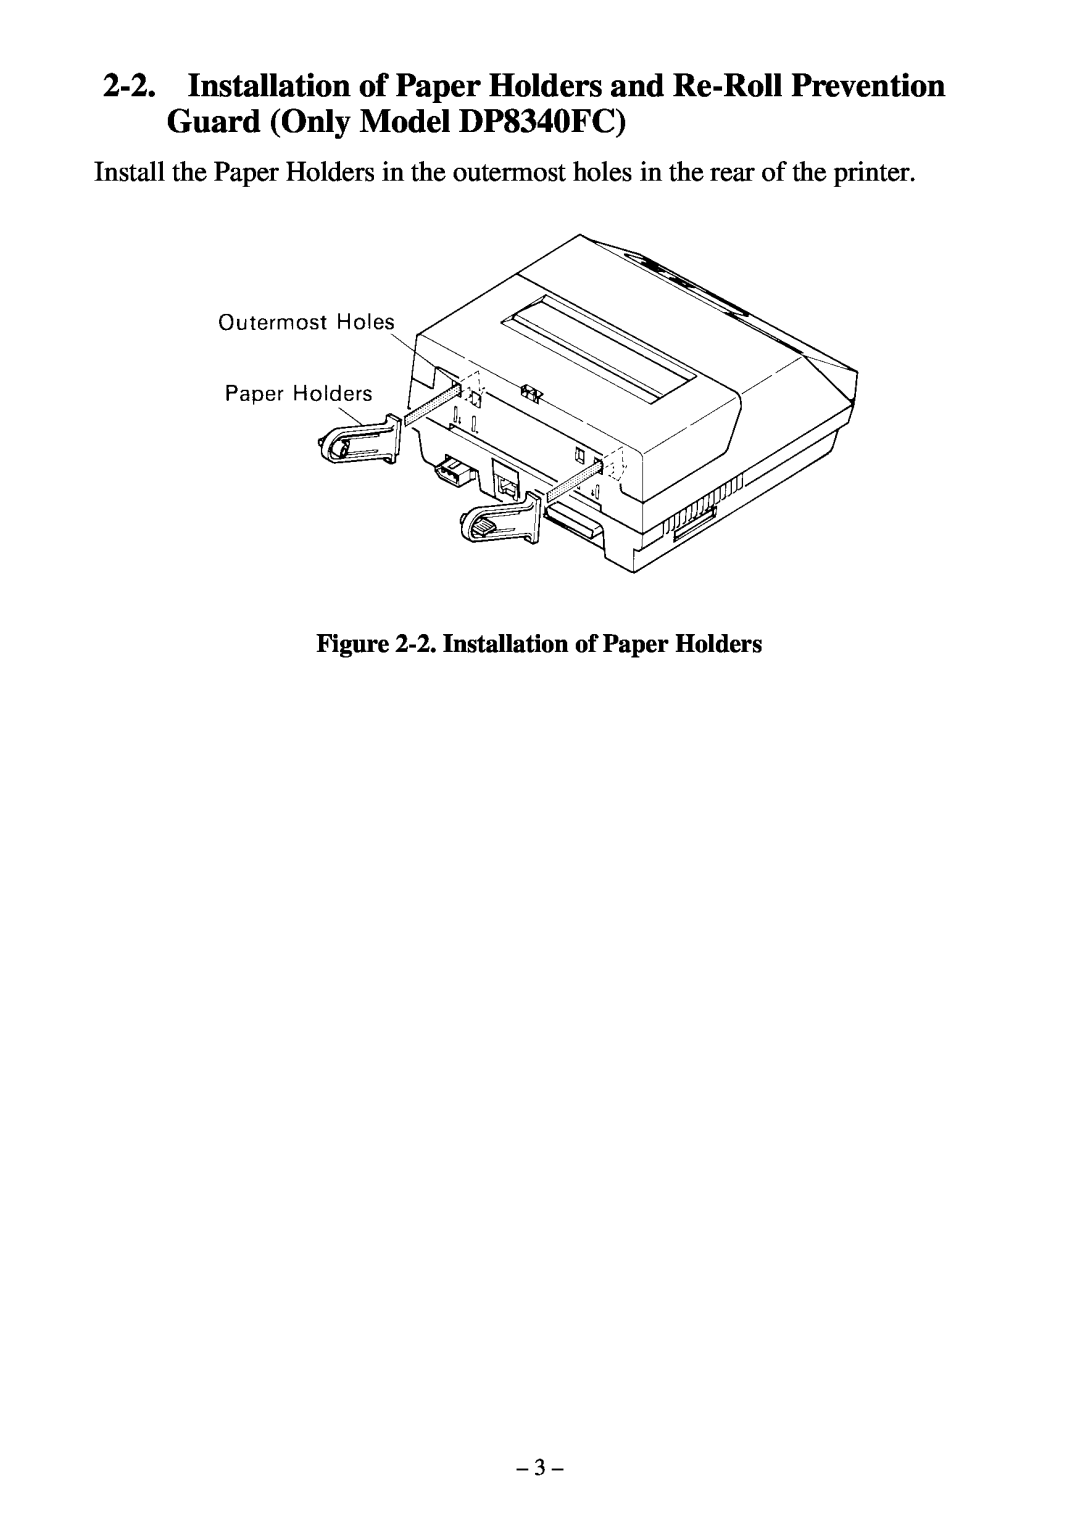 Star Micronics DP8340 user manual 2. Installation of Paper Holders 